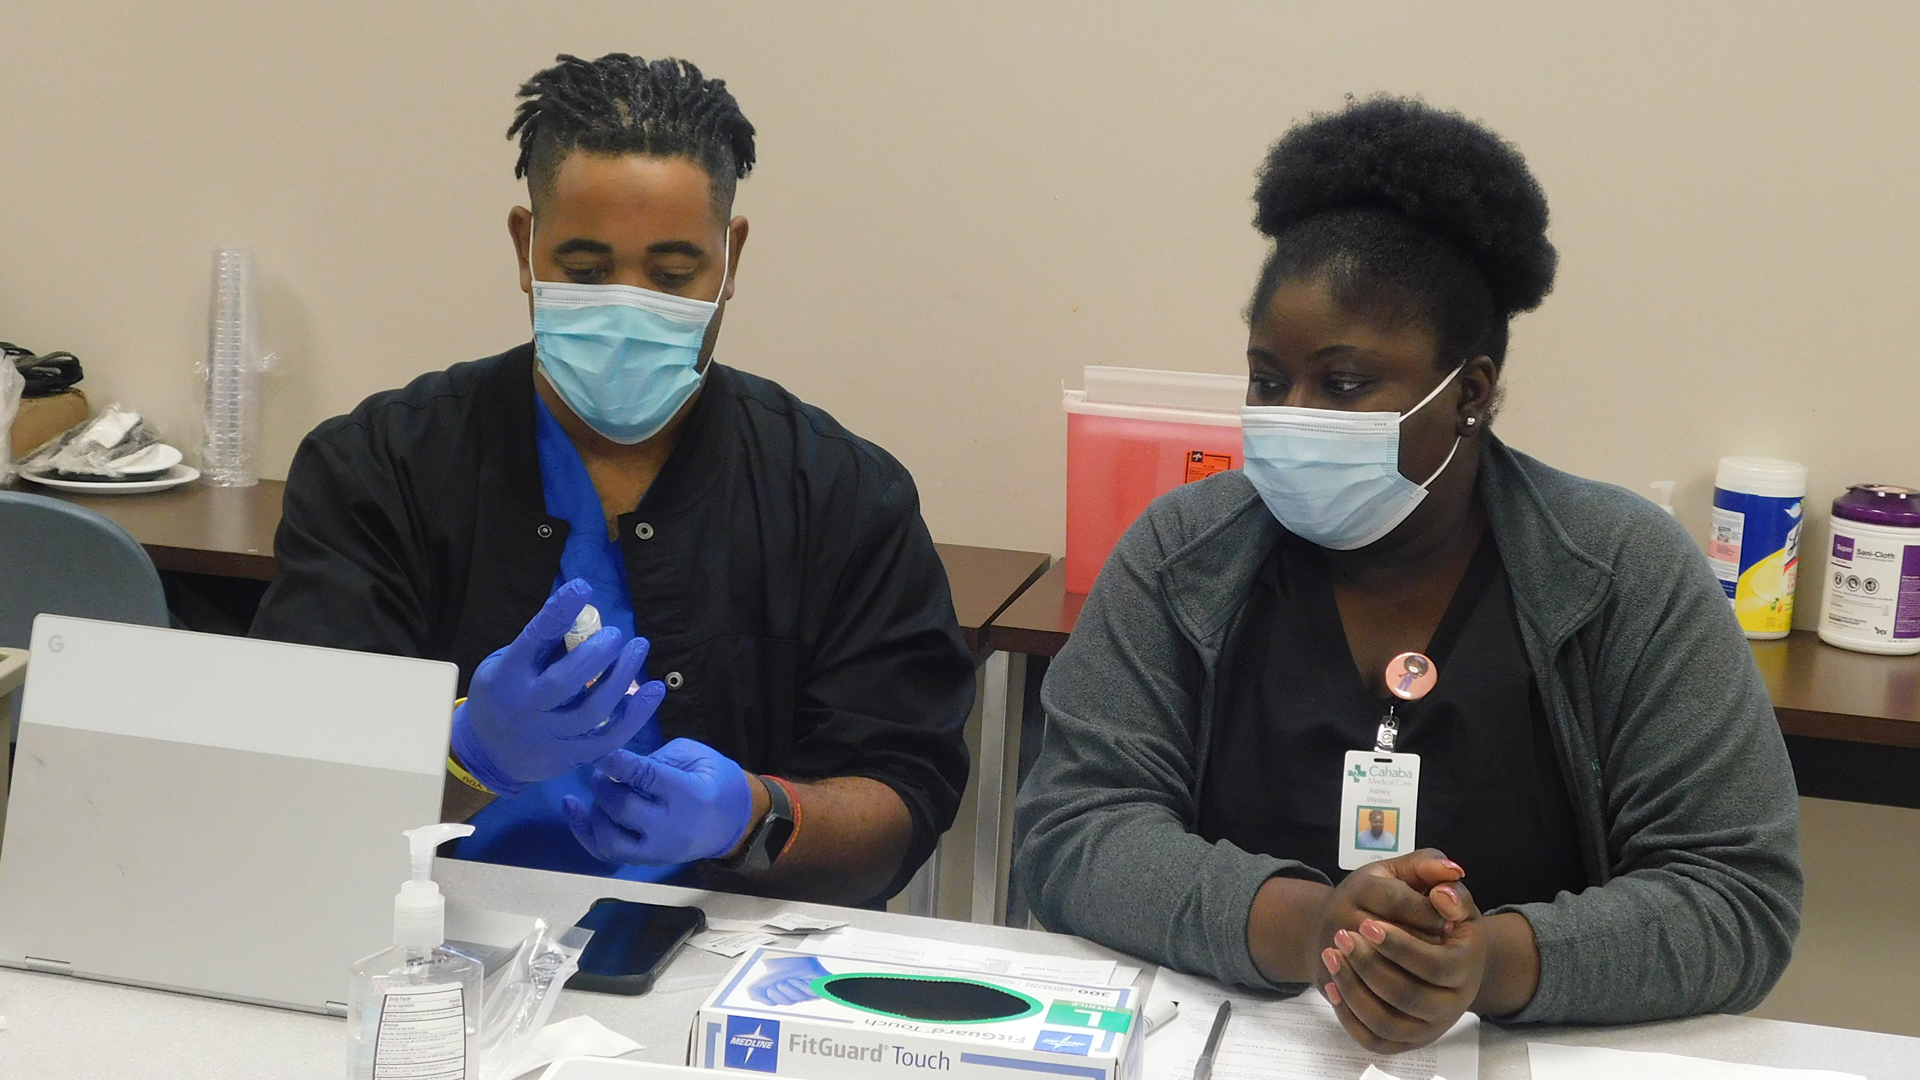 twp nurses in face masks examine a vial while sitting at a table